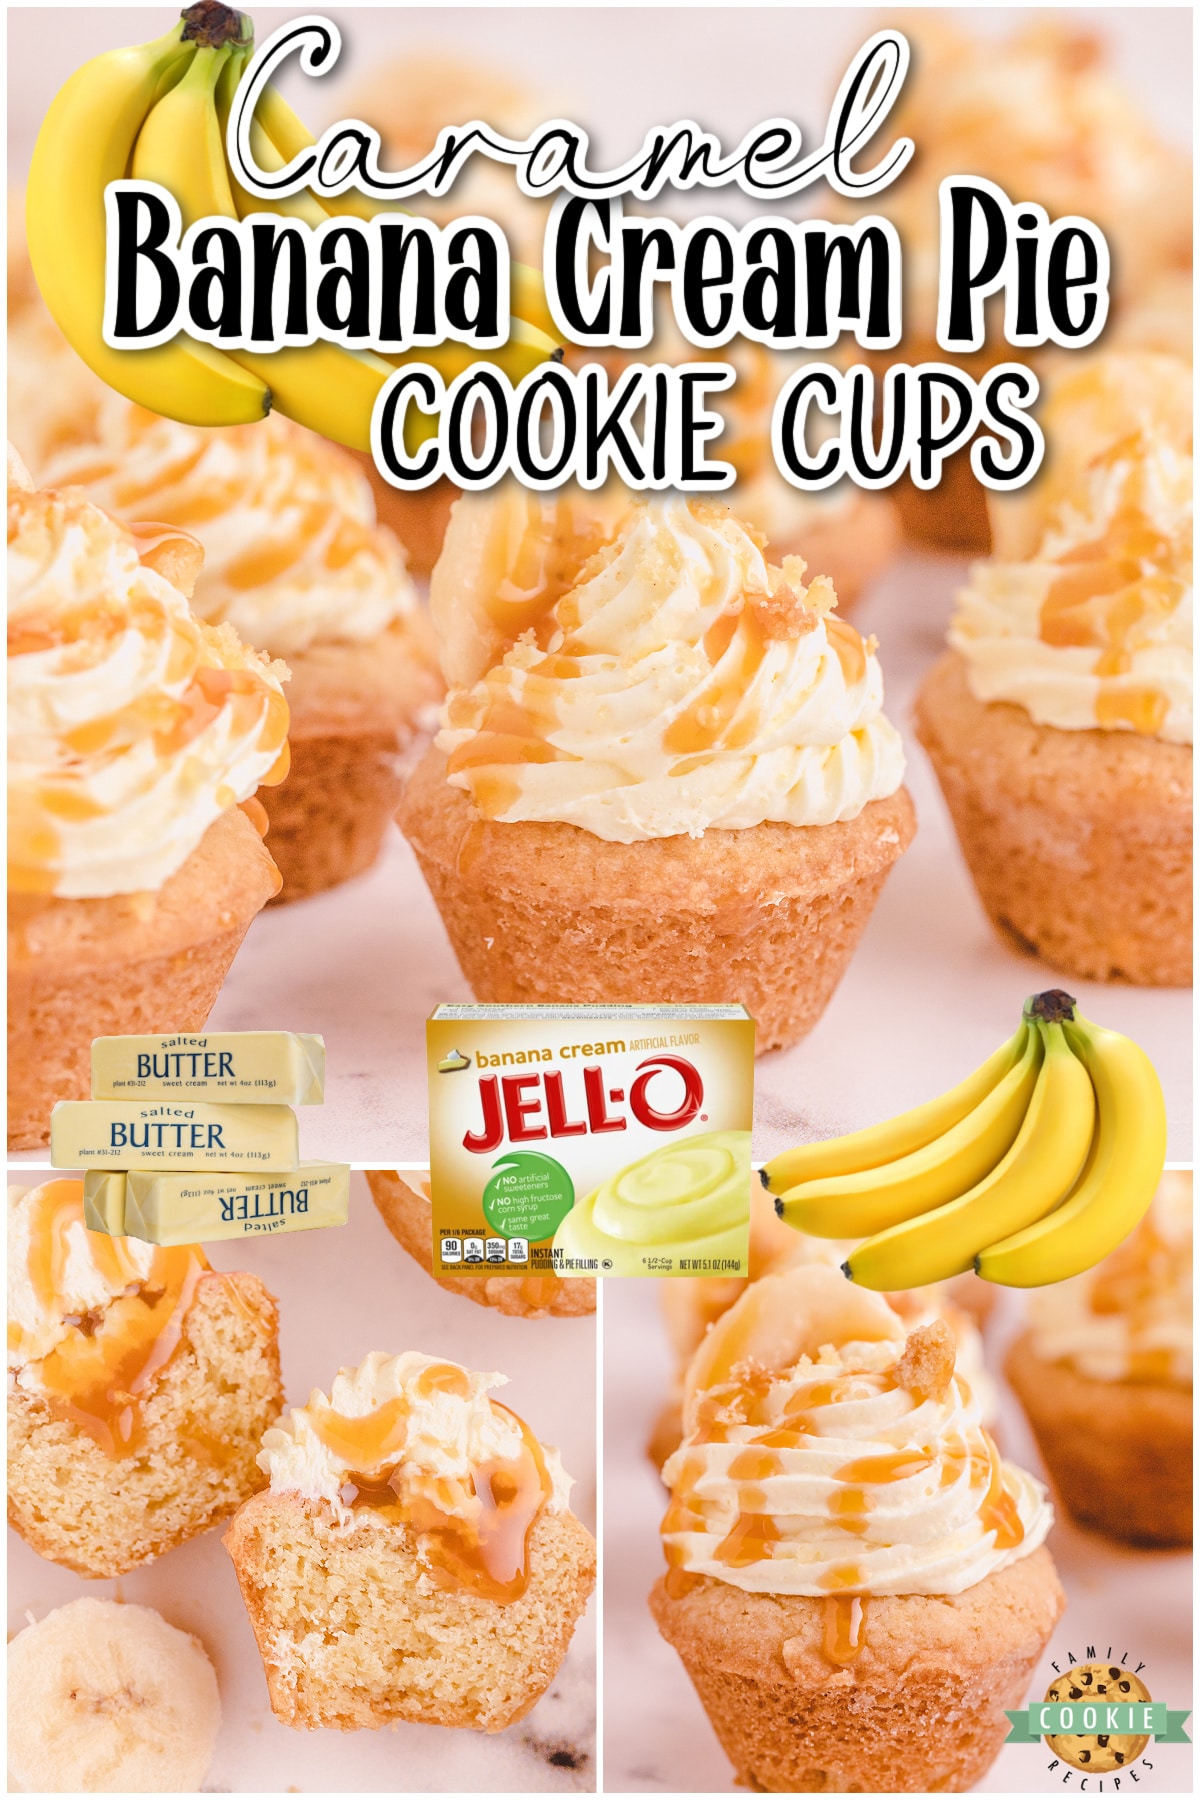 Caramel Banana Cream Pie Cookies are tiny banana cream pies topped with buttery caramel! Sugar cookies topped with a sweet creamy banana filling and caramel for a decadent treat! 